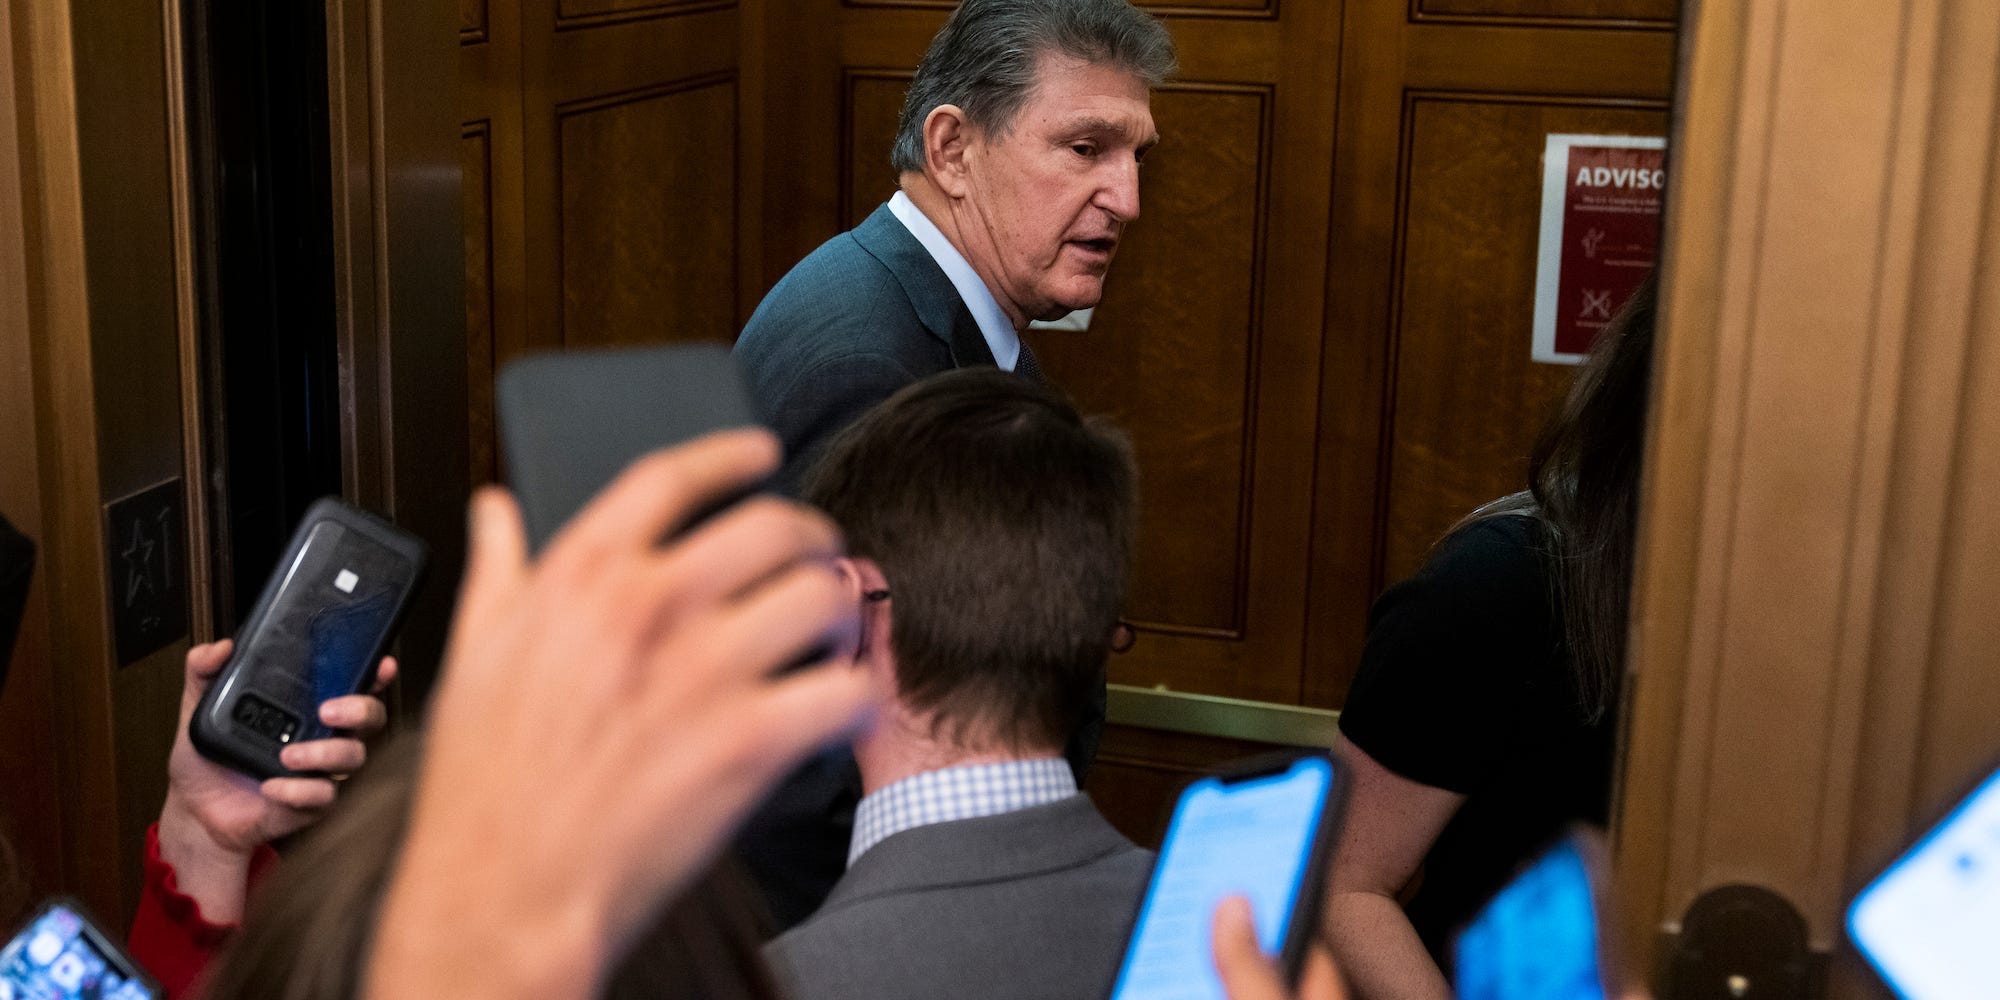 Democratic Sen. Joe Manchin of West Virginia is swarmed by reporters at the US Capitol on December 15, 2021.